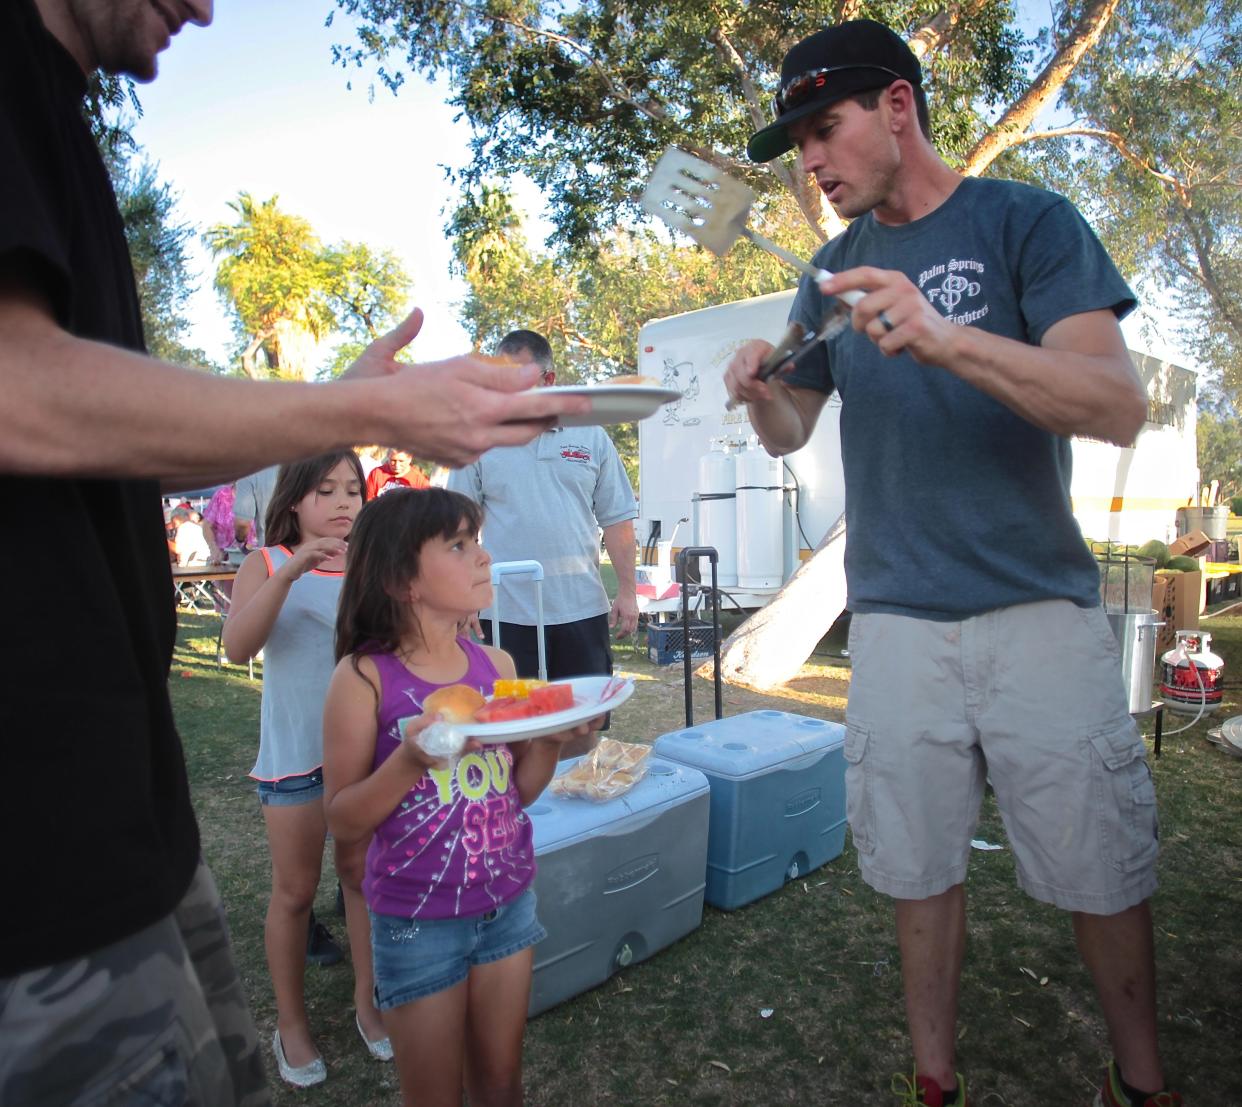 Firefighter Matt Kearney grills hamburgers for guests of the annual fish fry hosted by the Palm Springs Firemen’s Association in Palm Springs. This year's event will take place on June 4.